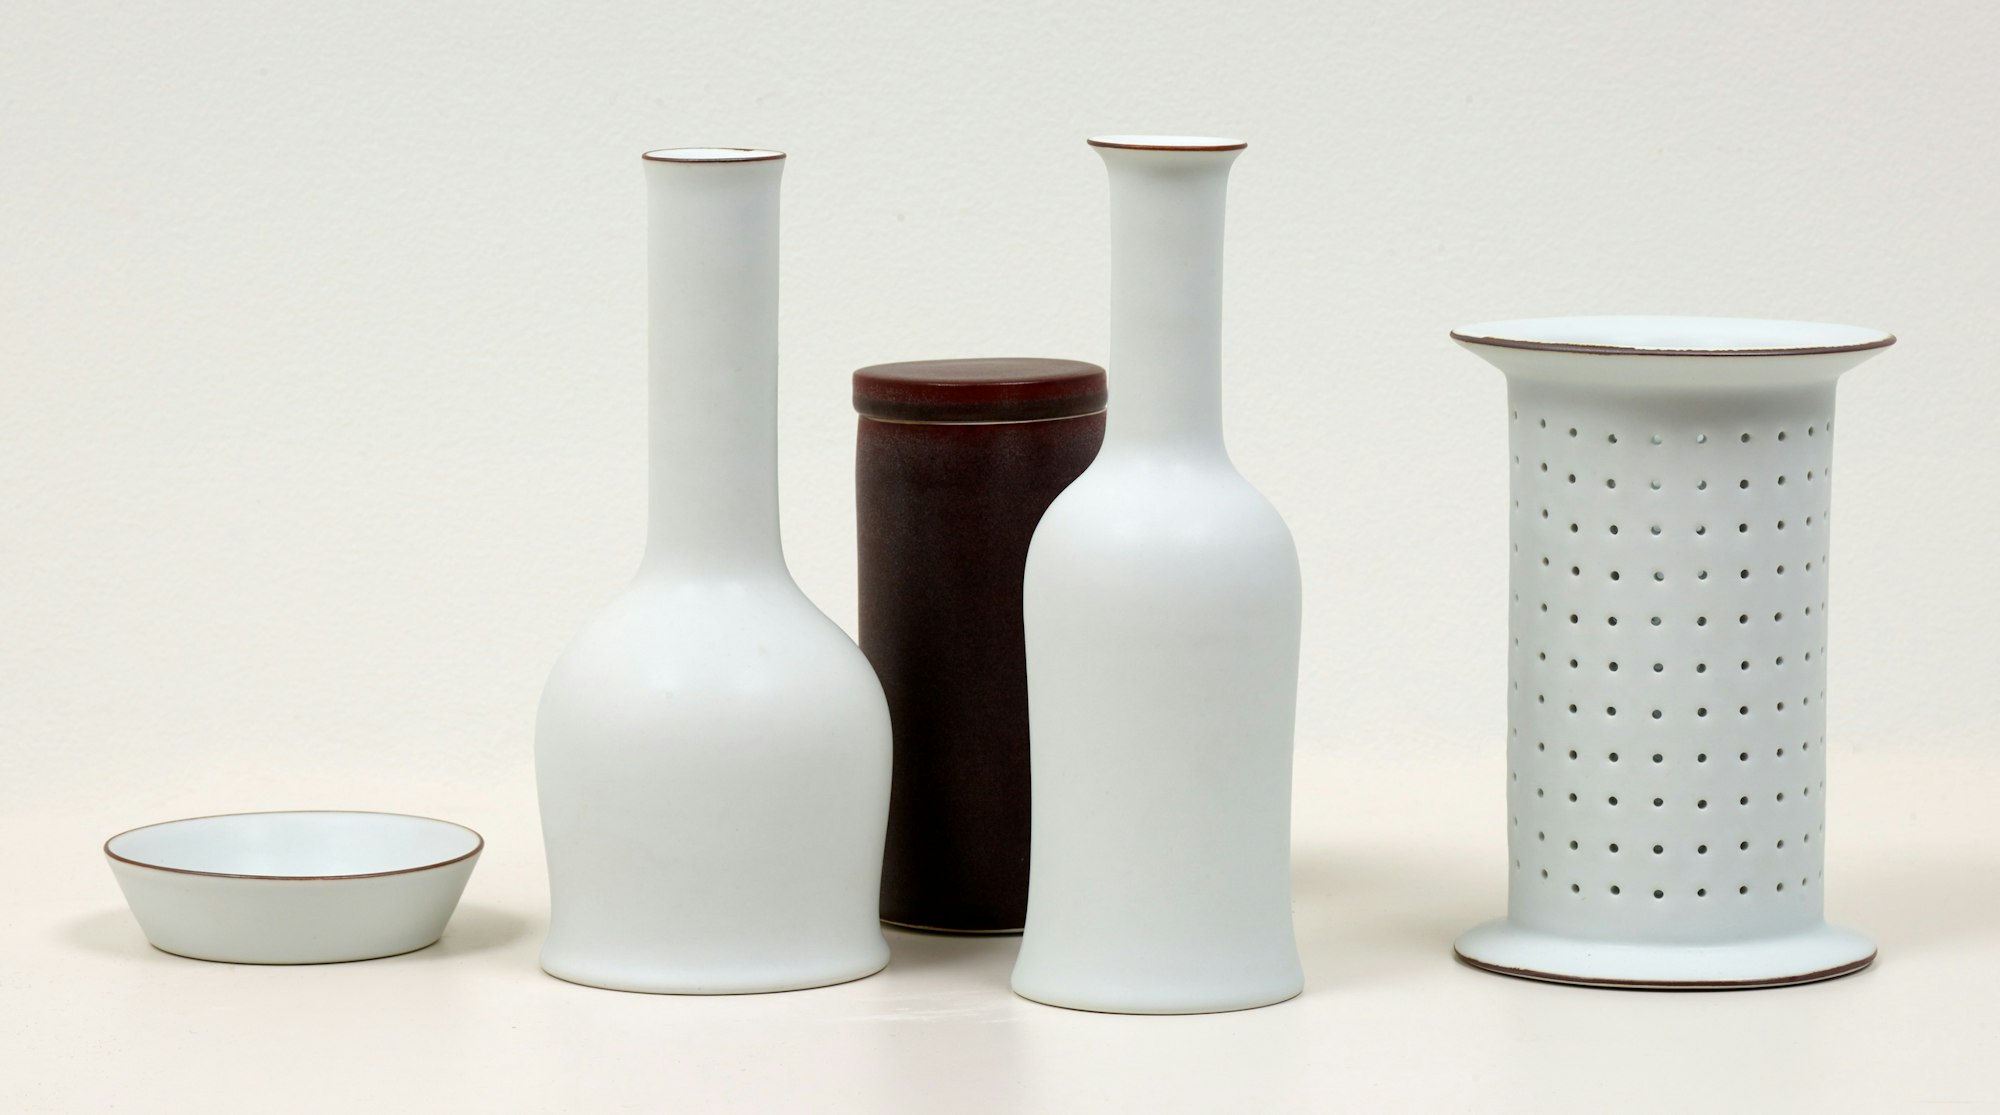 A group of five ceramic vessels of different shapes. Four are white and the other is dark.